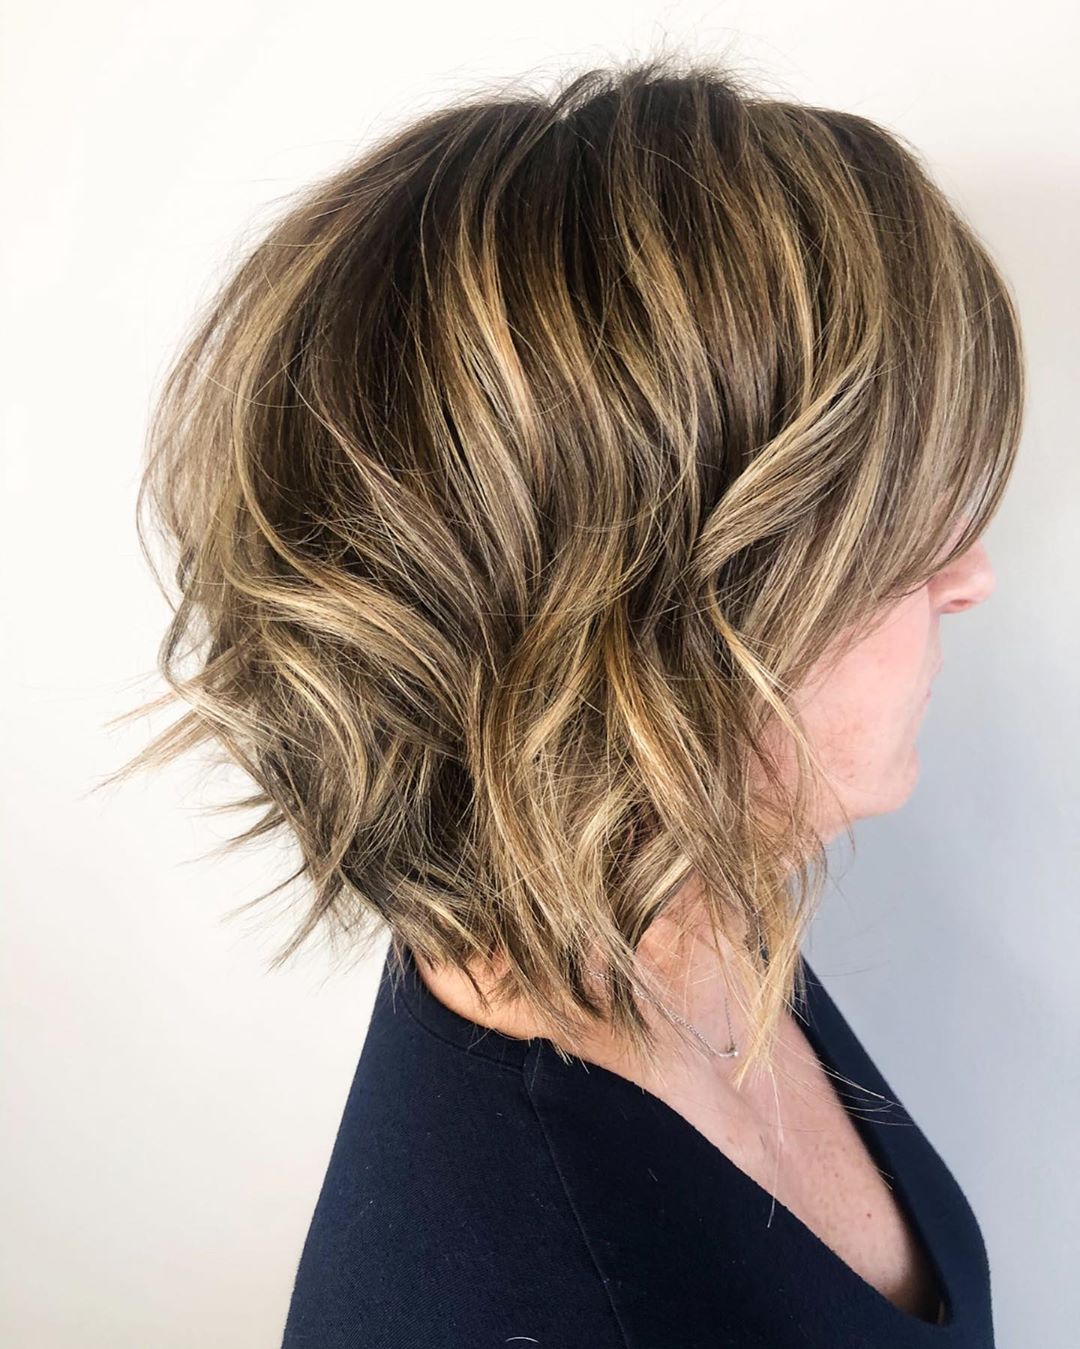 The Perfect Textured Cut for thick-haired women in their 50's